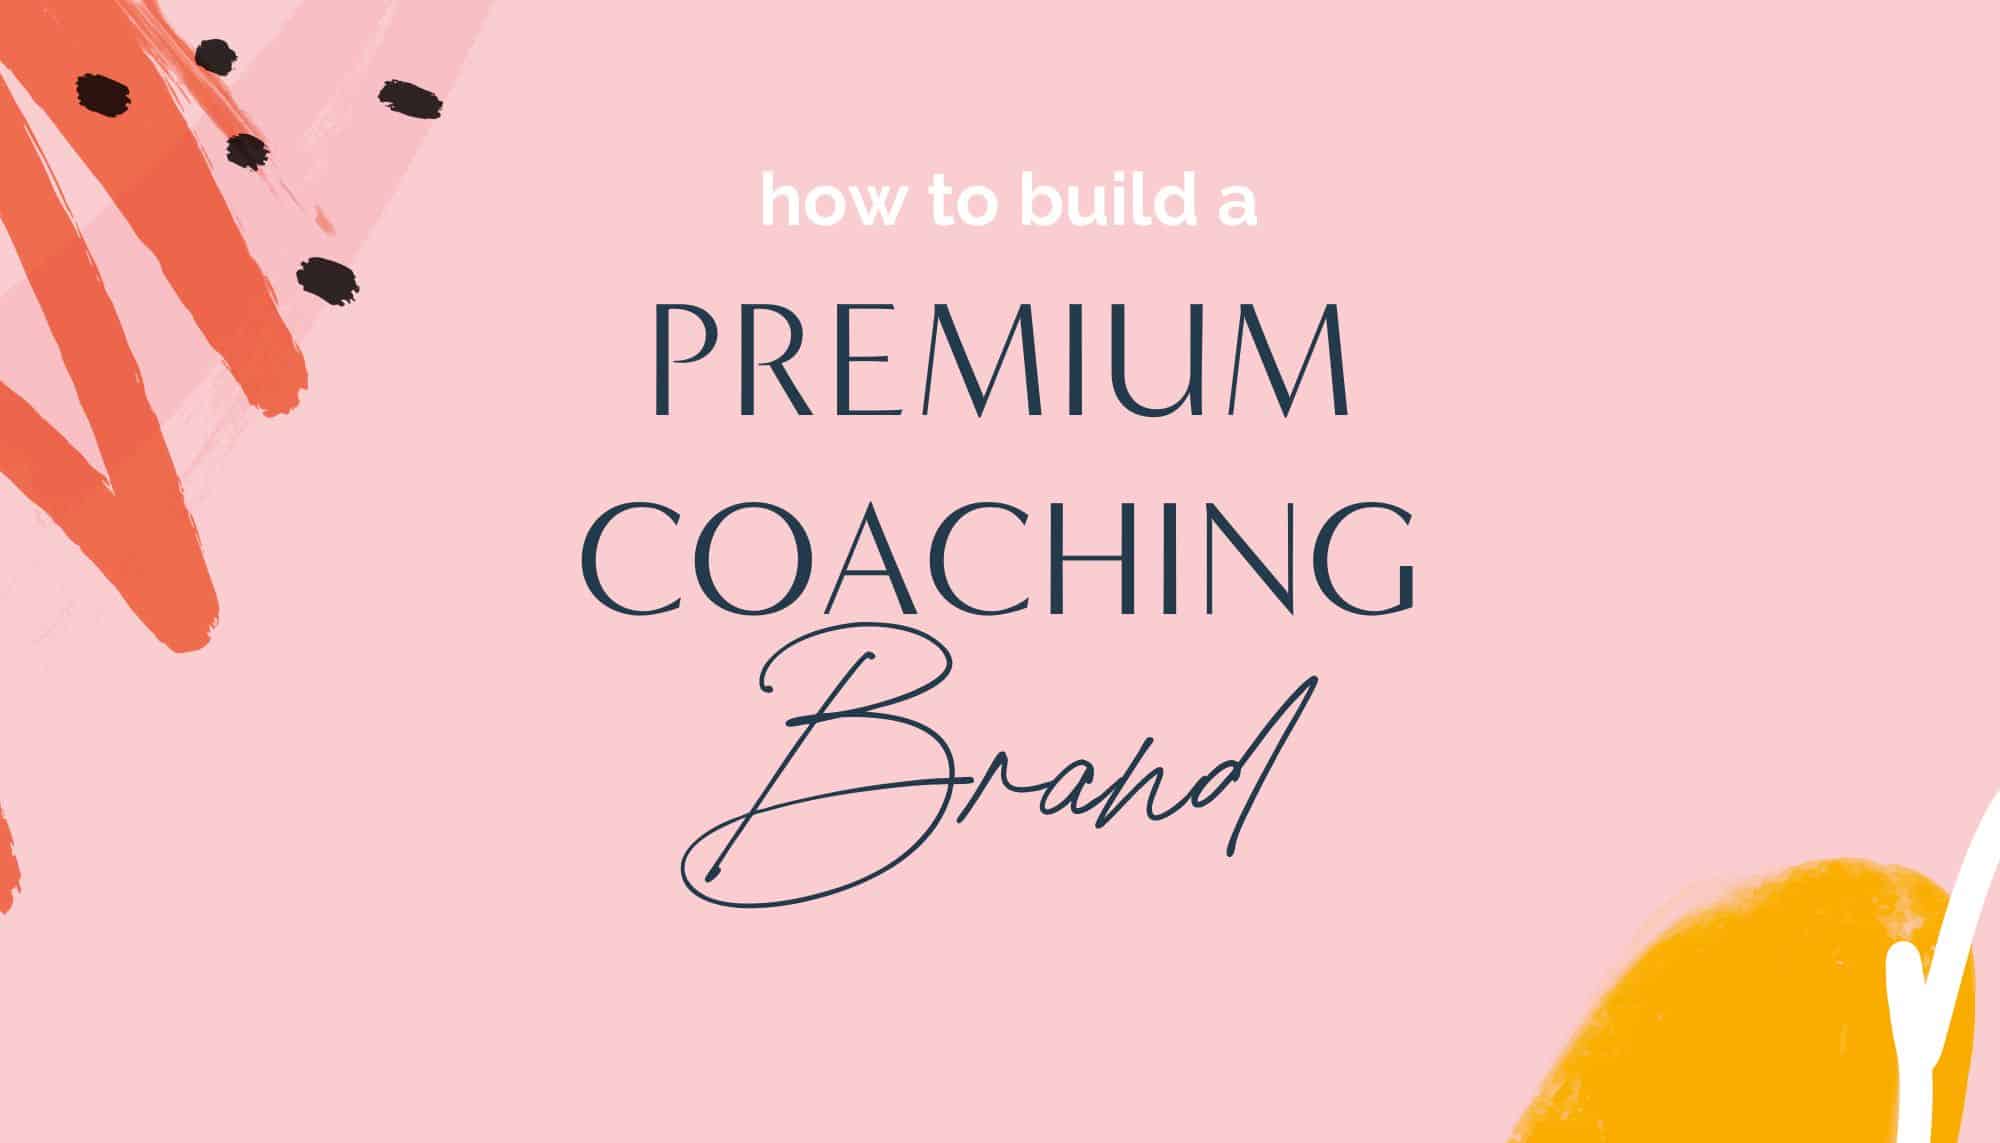 How to build a premium coaching brand online for coaches, consultants and experts to attract high-end clients